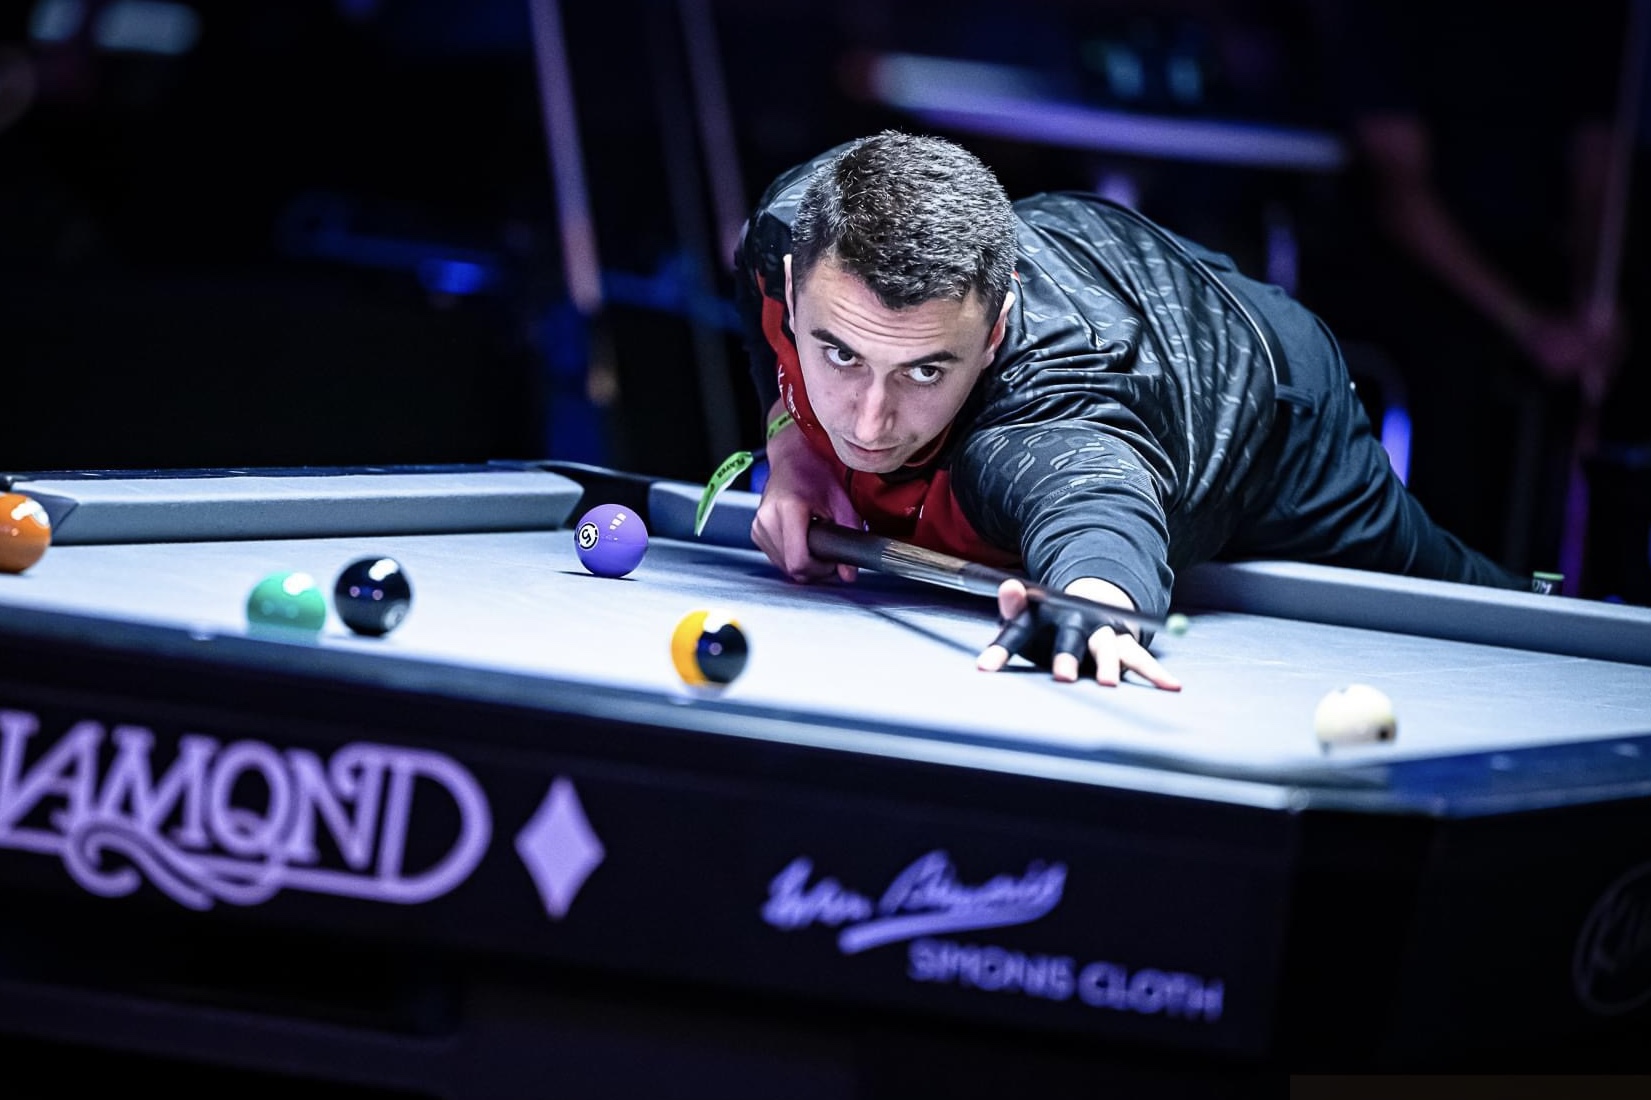 Spanish Open Pool Championship 2023 Draw, live scores, format, prize fund and how to watch